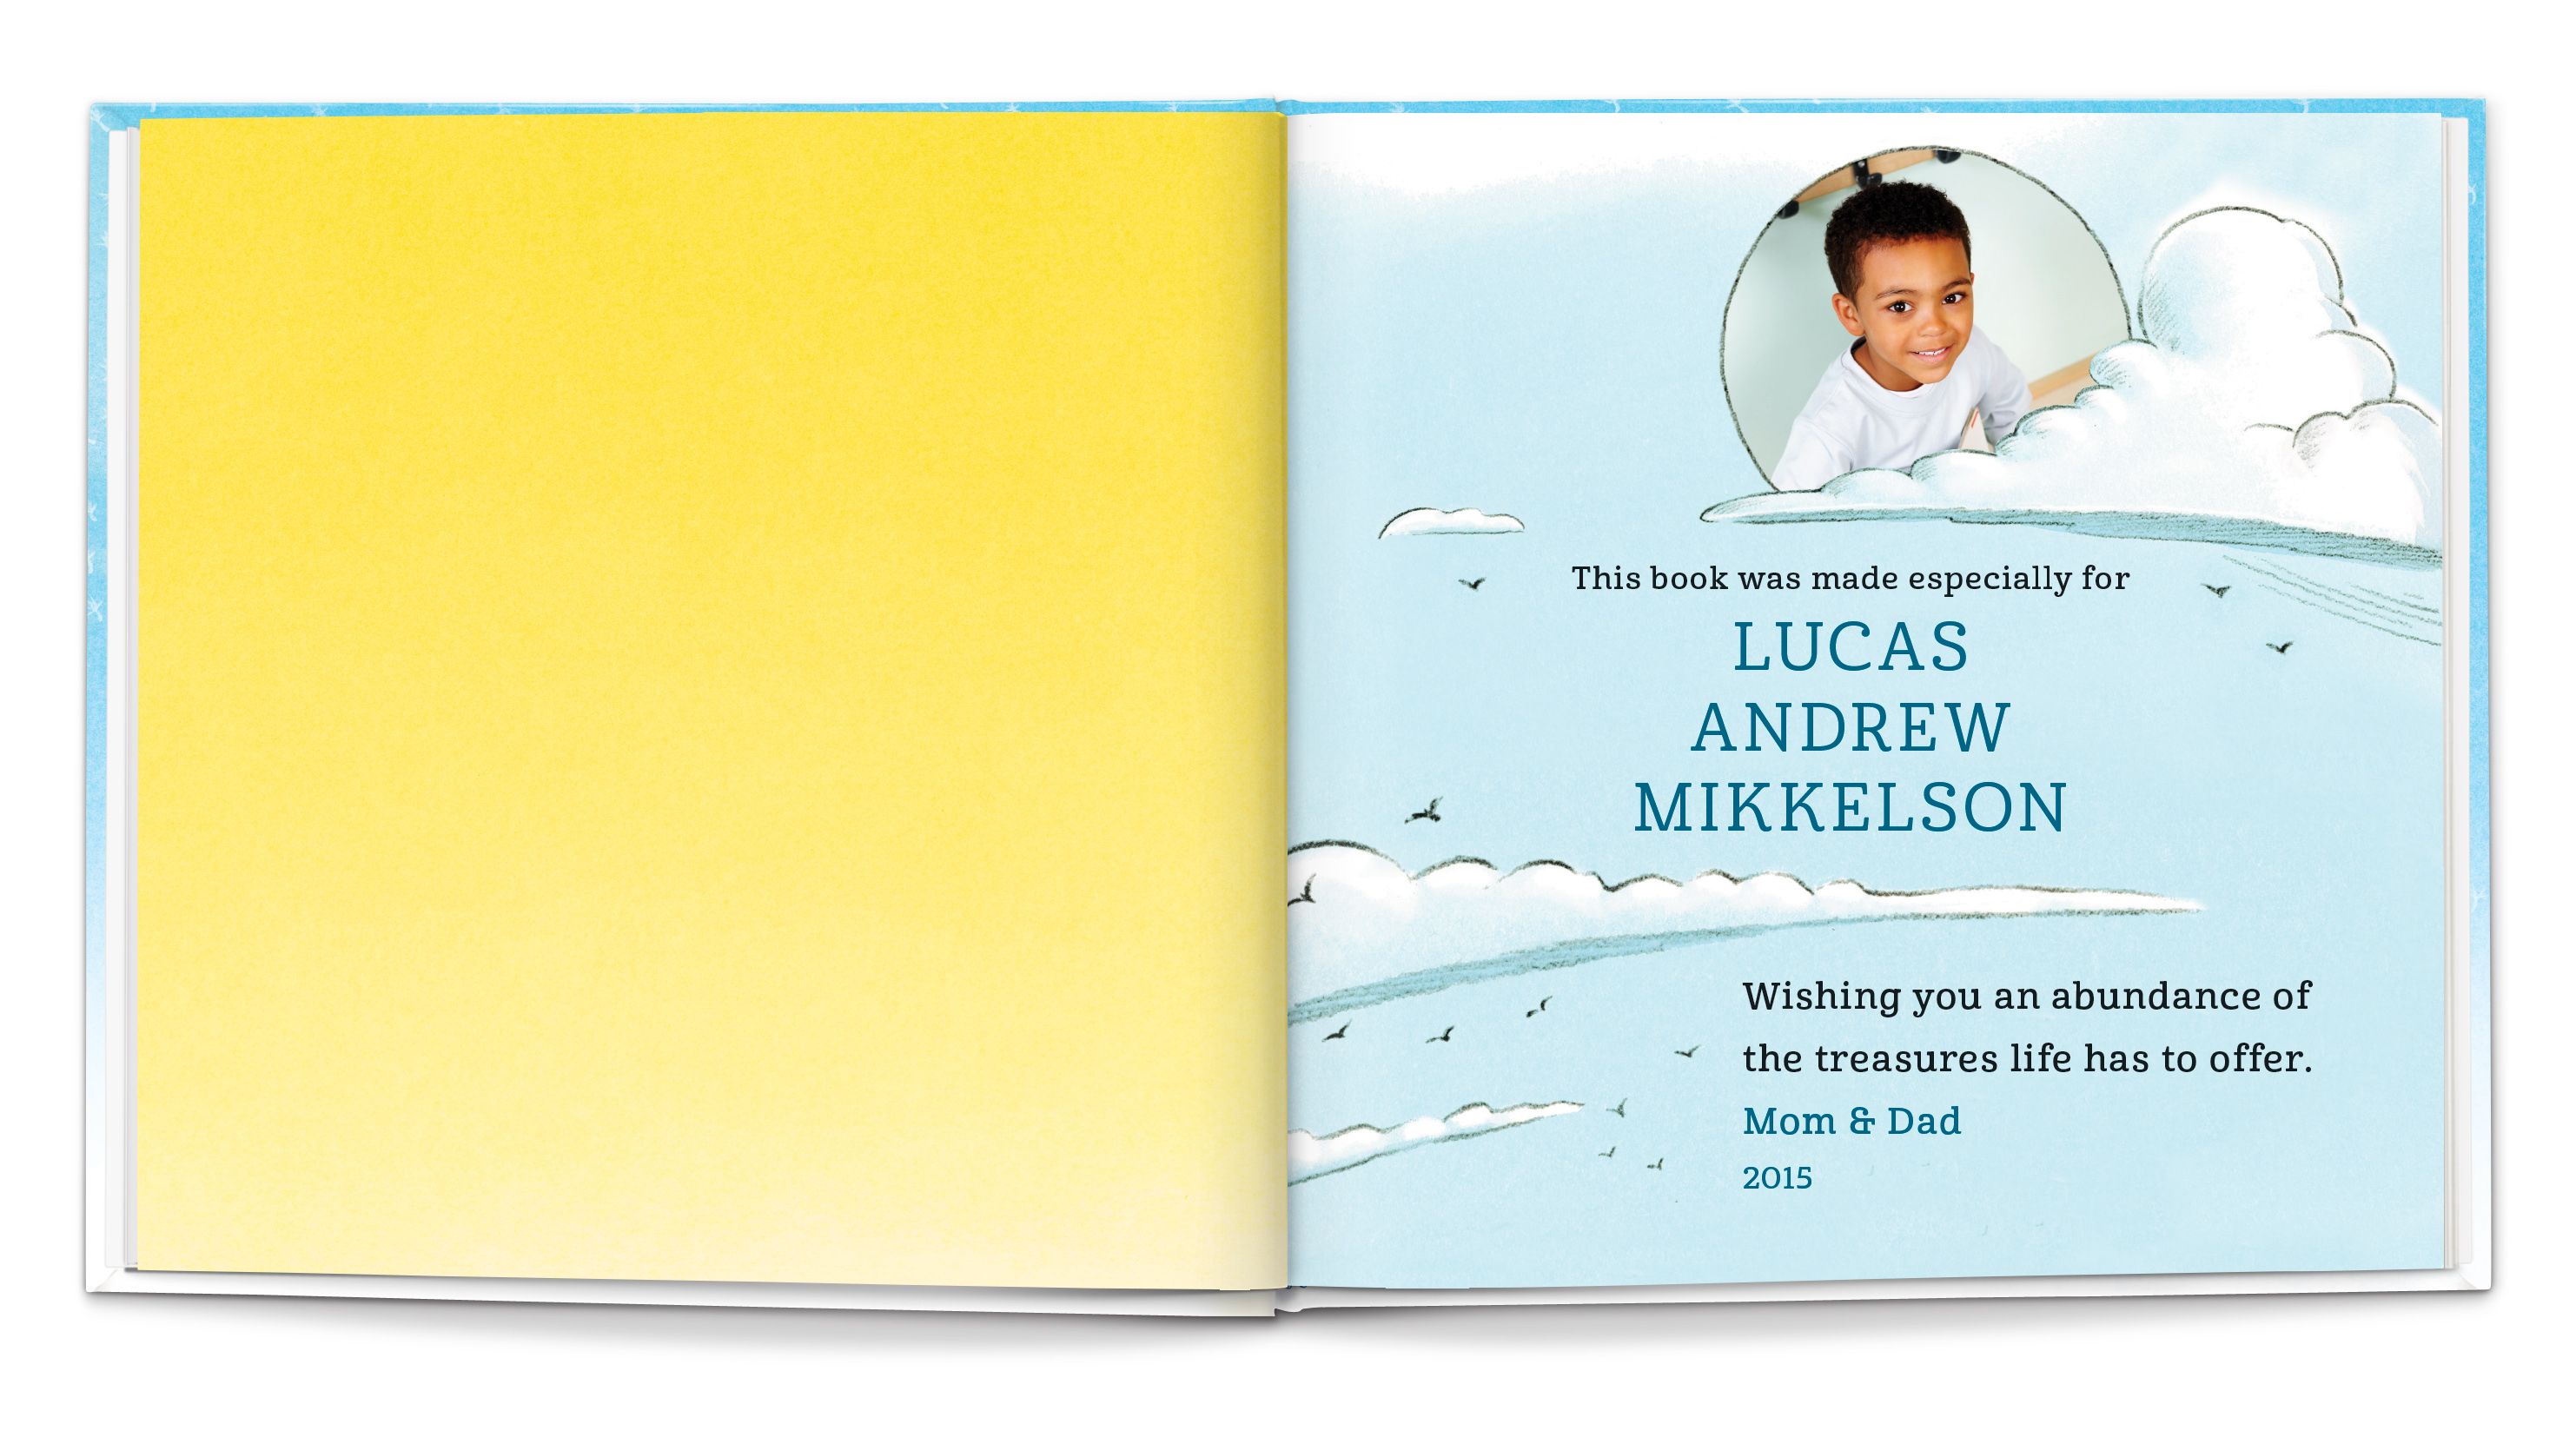 The personalized version of "I Wish You More" available at ISeeMe.com can even be customized with a photo on the dedication page.